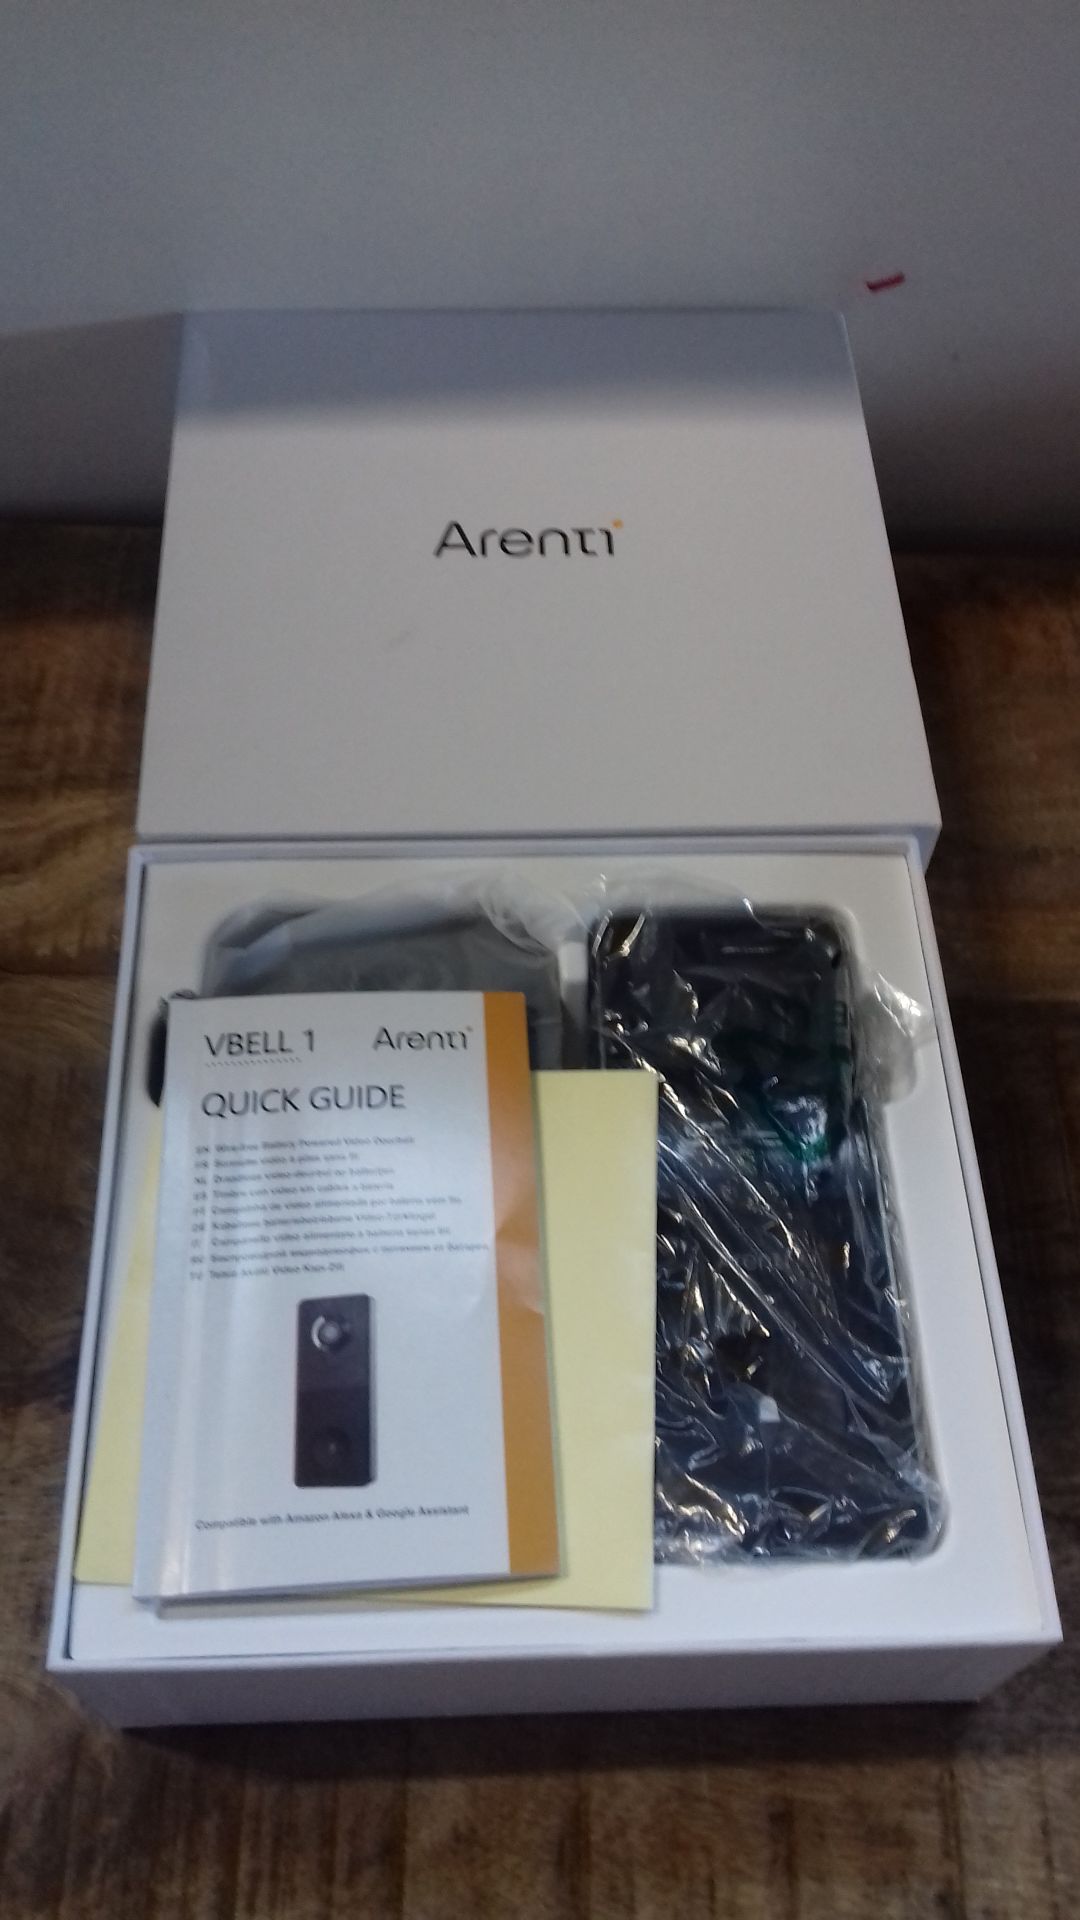 RRP £97.35 ARENTI 2K Video Doorbell Wireless with Chime - Image 2 of 2